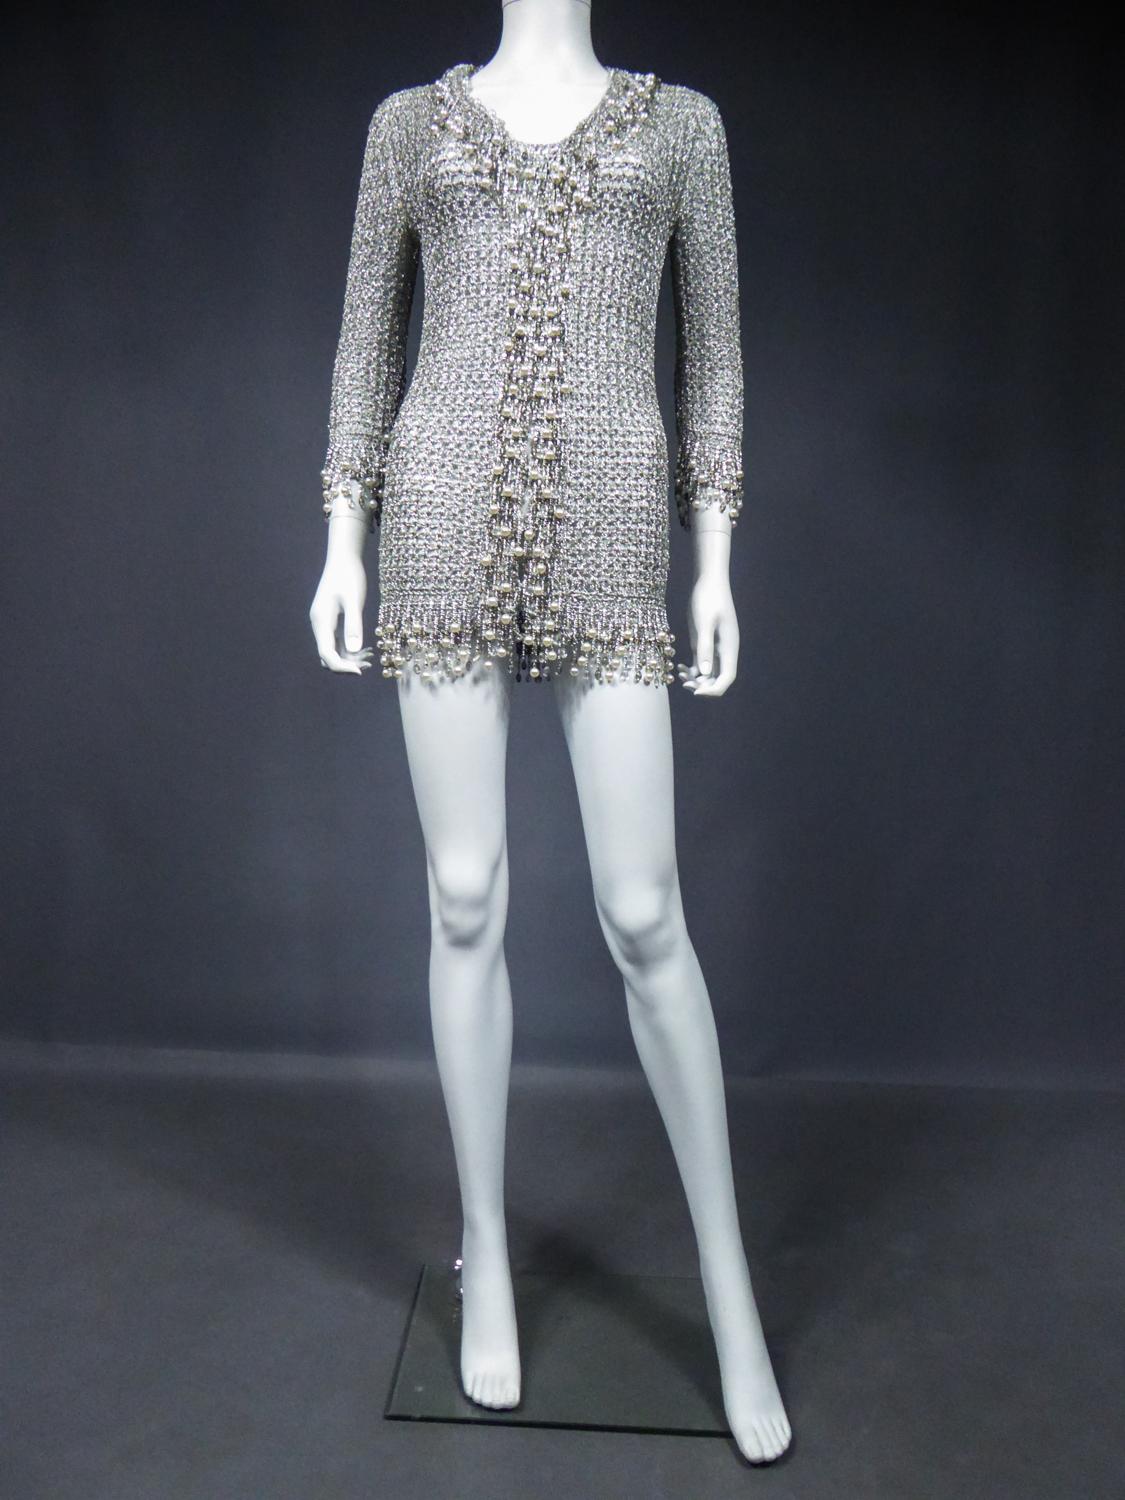 Women's A Loris Azzaro Evening Jacket in Silver Lurex Embroidered with Pearls Circa 1970